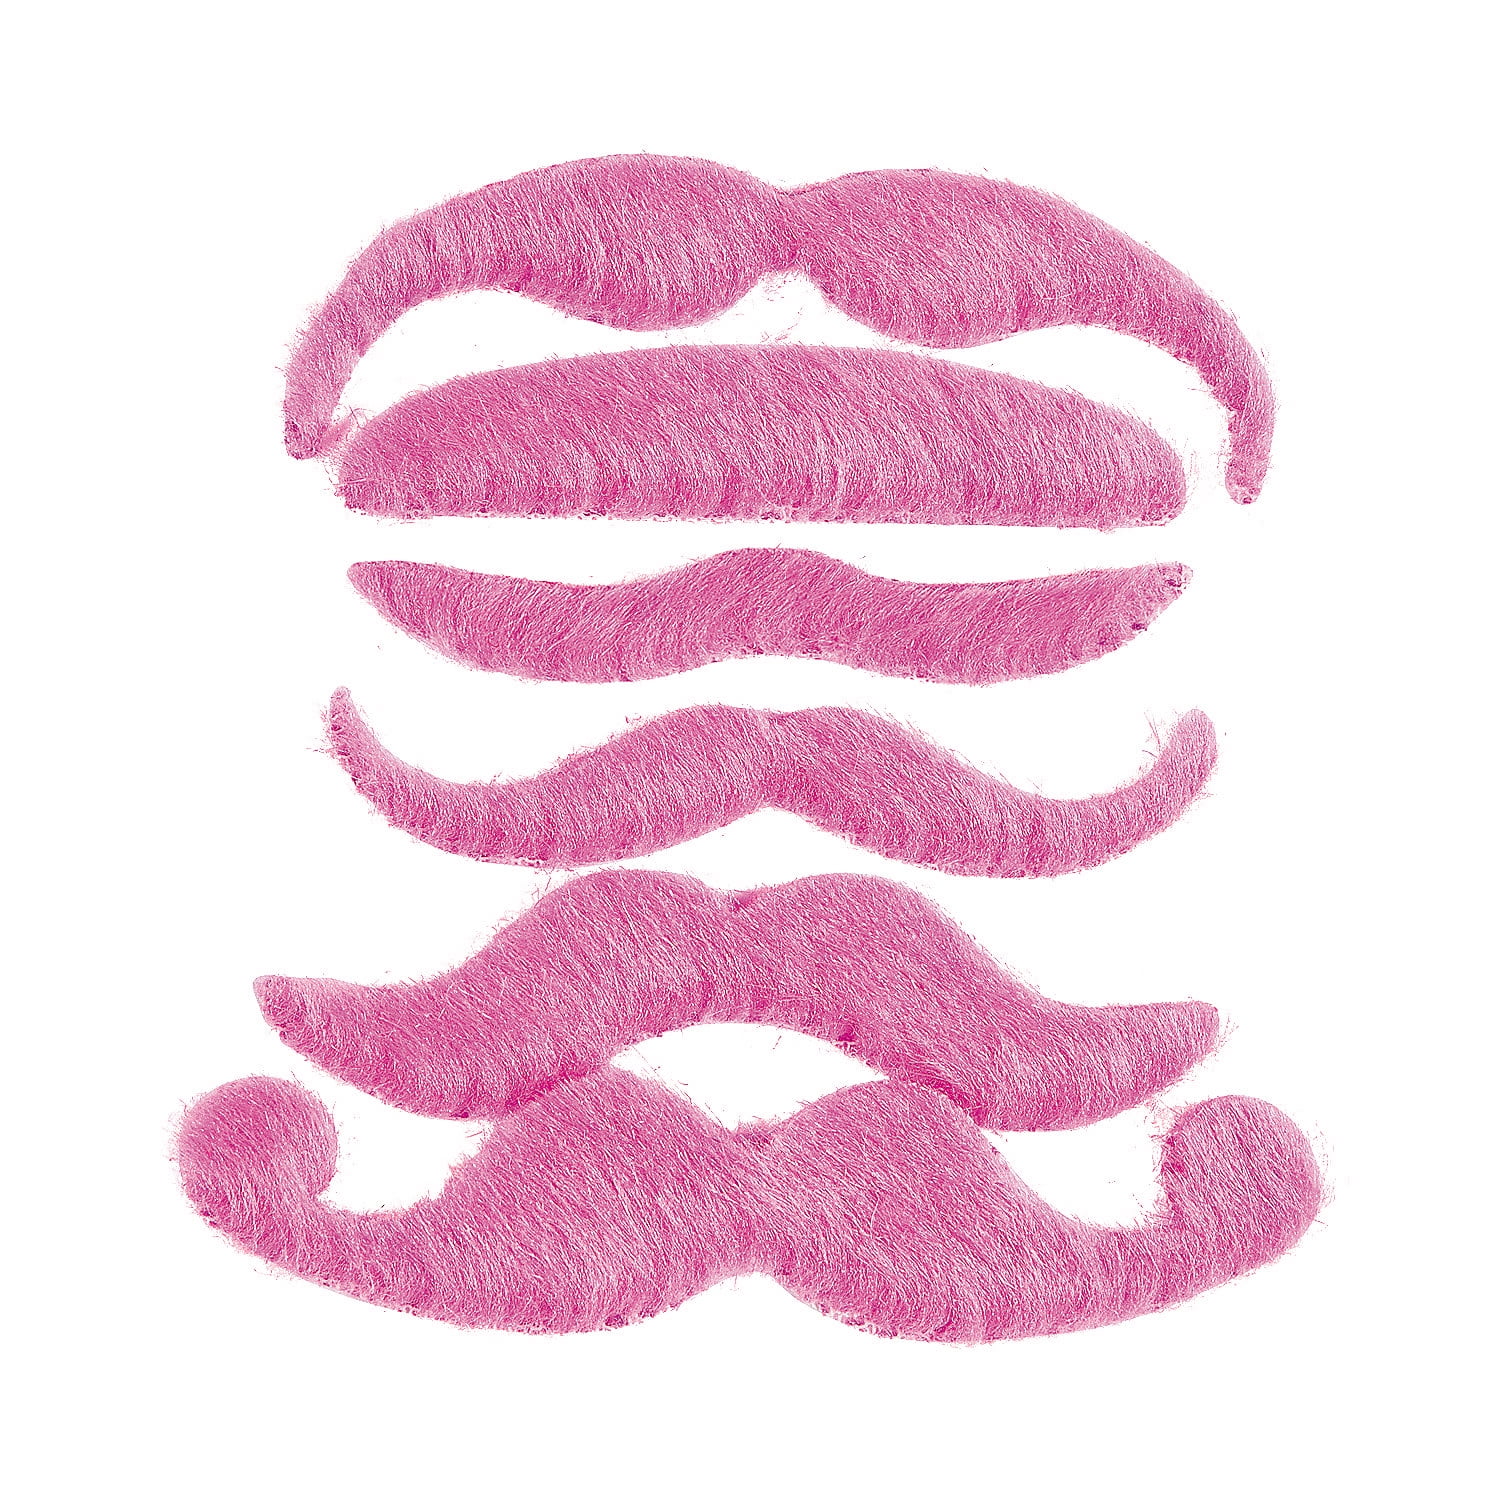 120 Fake Moustaches Assorted Mustache Fancy Dress Party 10 x packs of 12 